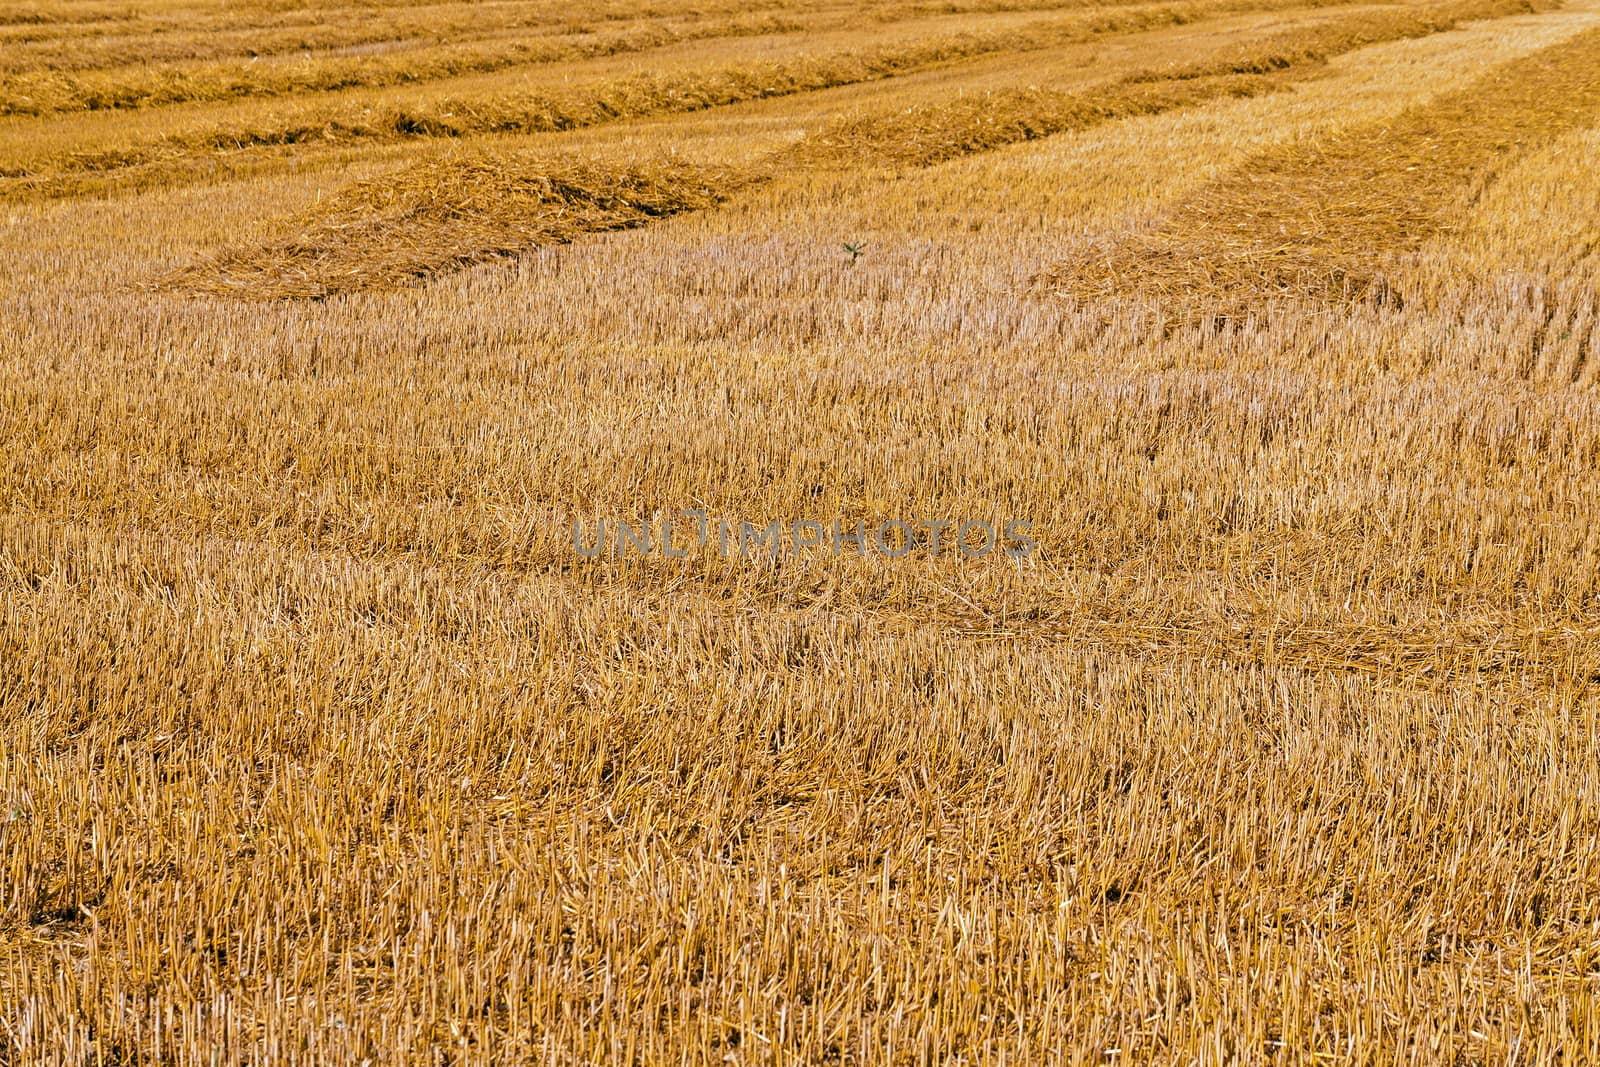   an agricultural field after the harvest company of wheat.